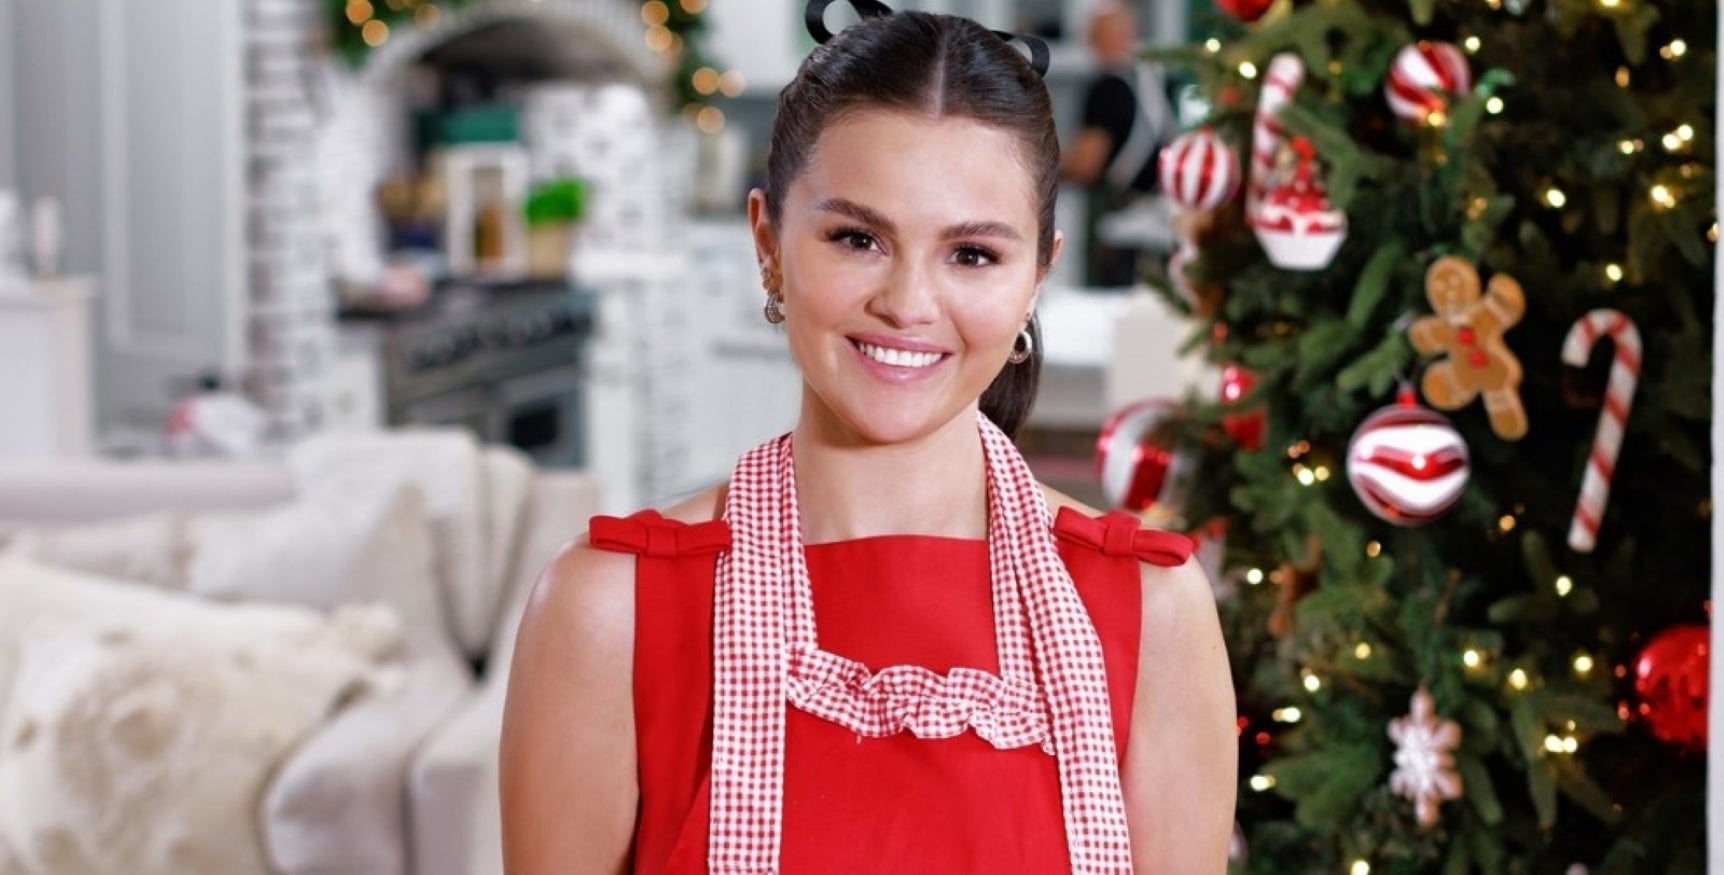 Selena Gomez in a promotional photo for the Food Network special "Selena + Chef: Home for the Holidays"